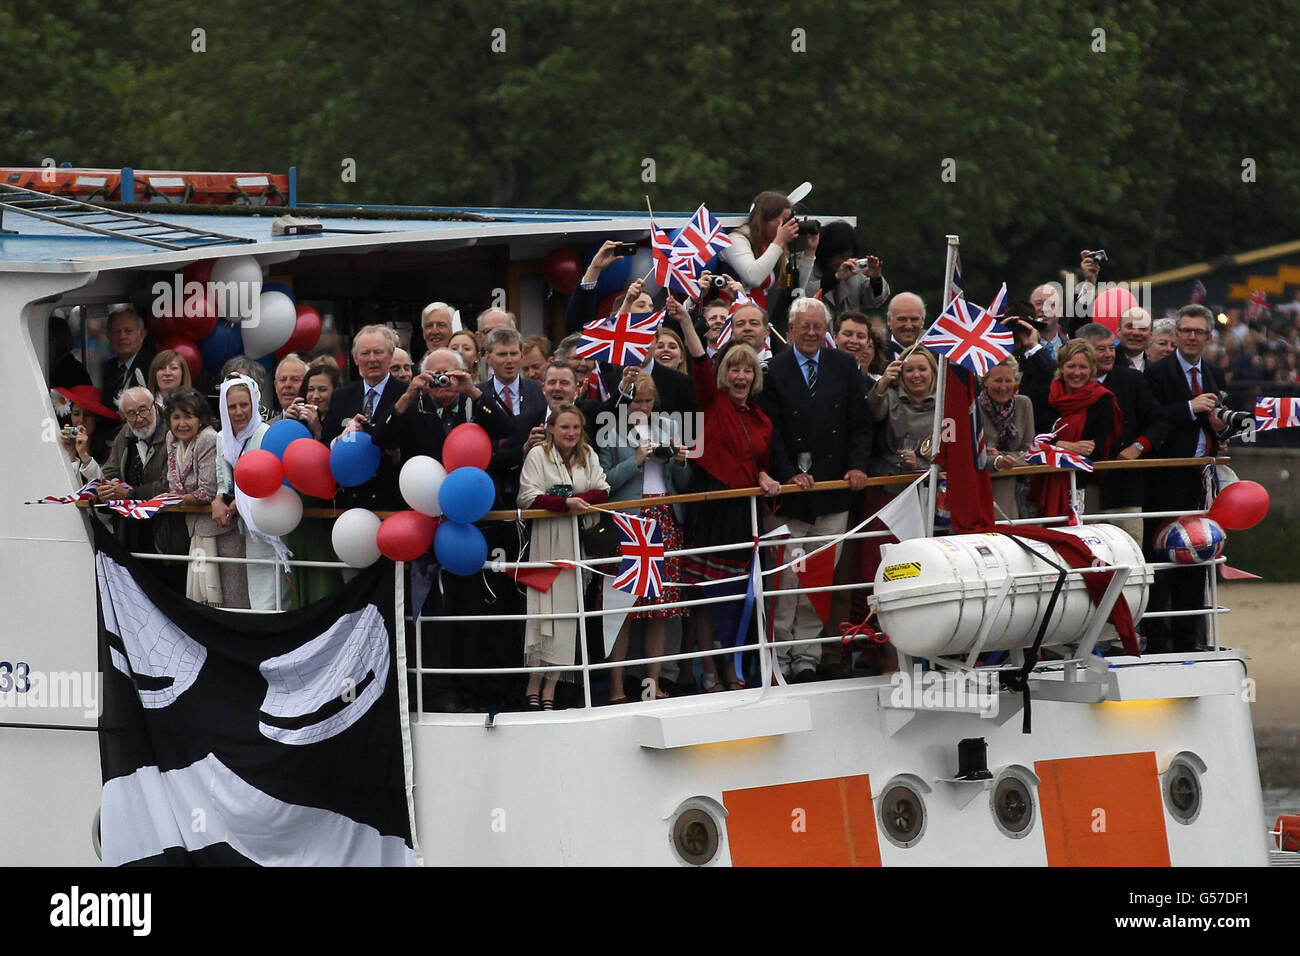 Royal well wisher on a boat during the Diamond Jubilee River Pageant on the River Thames, London. Stock Photo